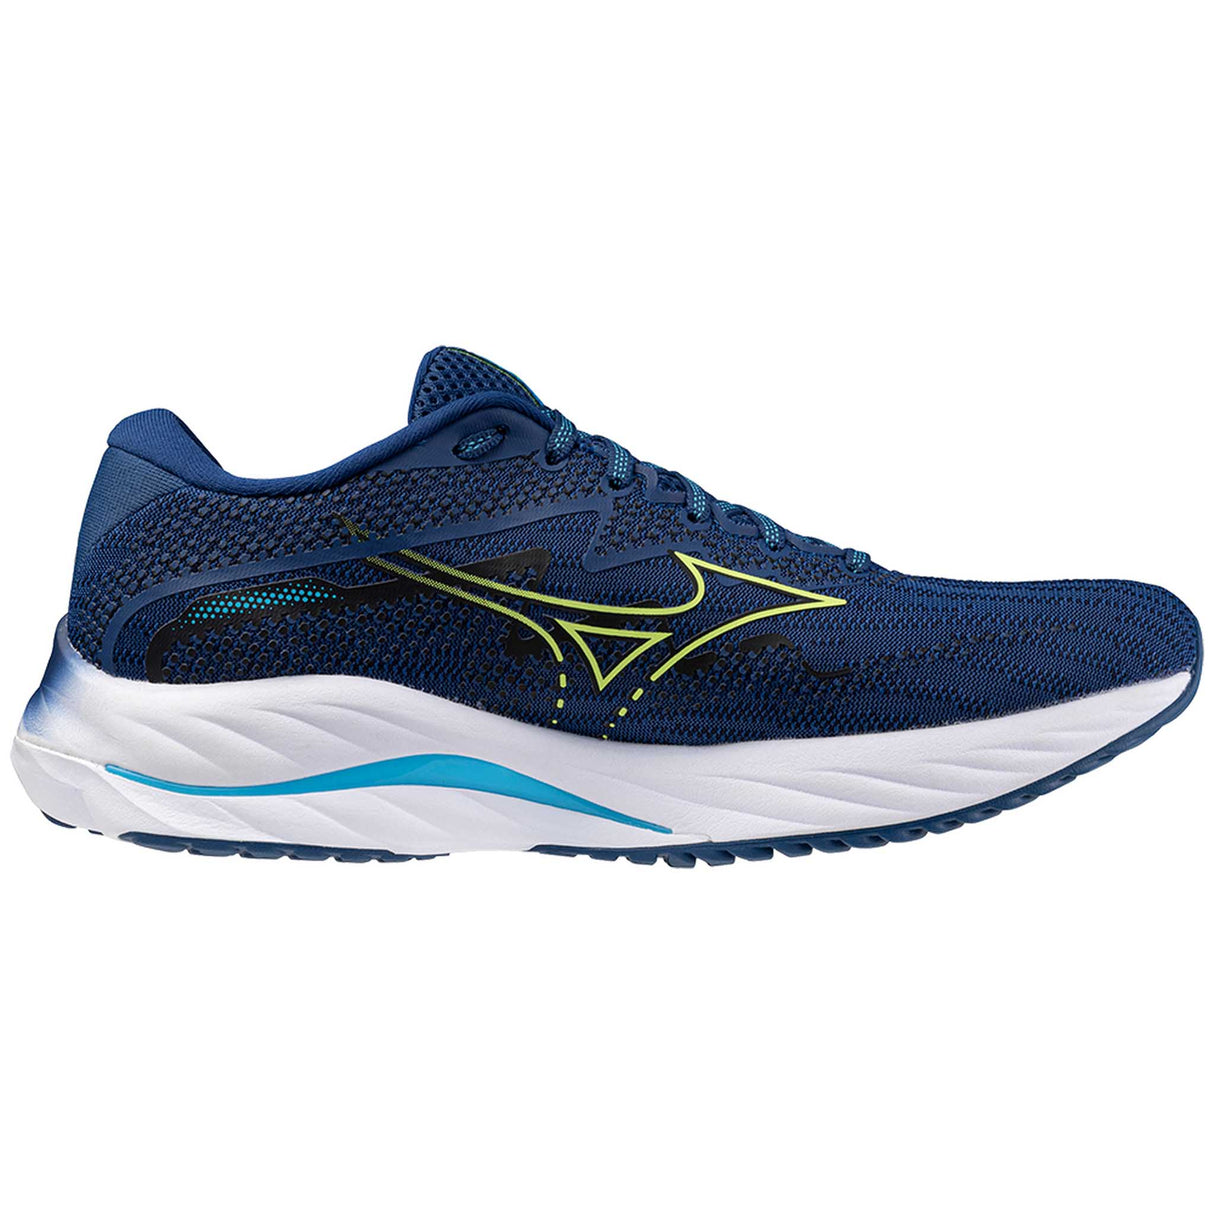 Mizuno Wave Rider 27 chaussures de course à pied homme lateral- Navy Peony / Sharp Green